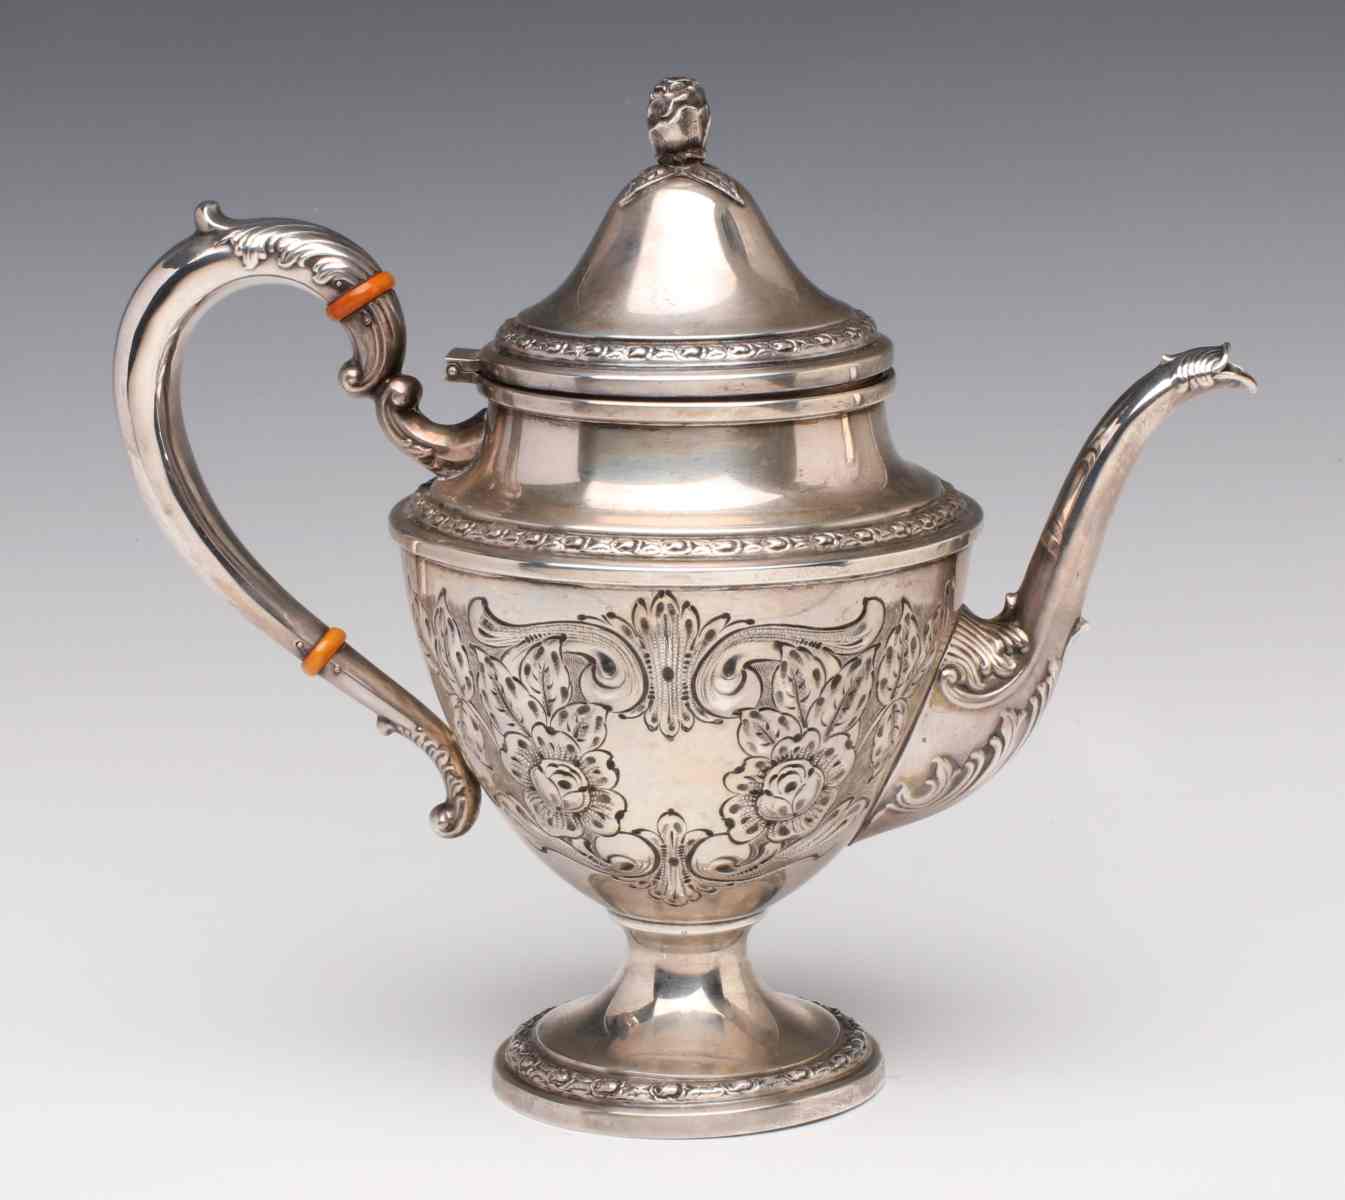 A FRANK WHITING TALISMAN ROSE STERLING COFFEE POT